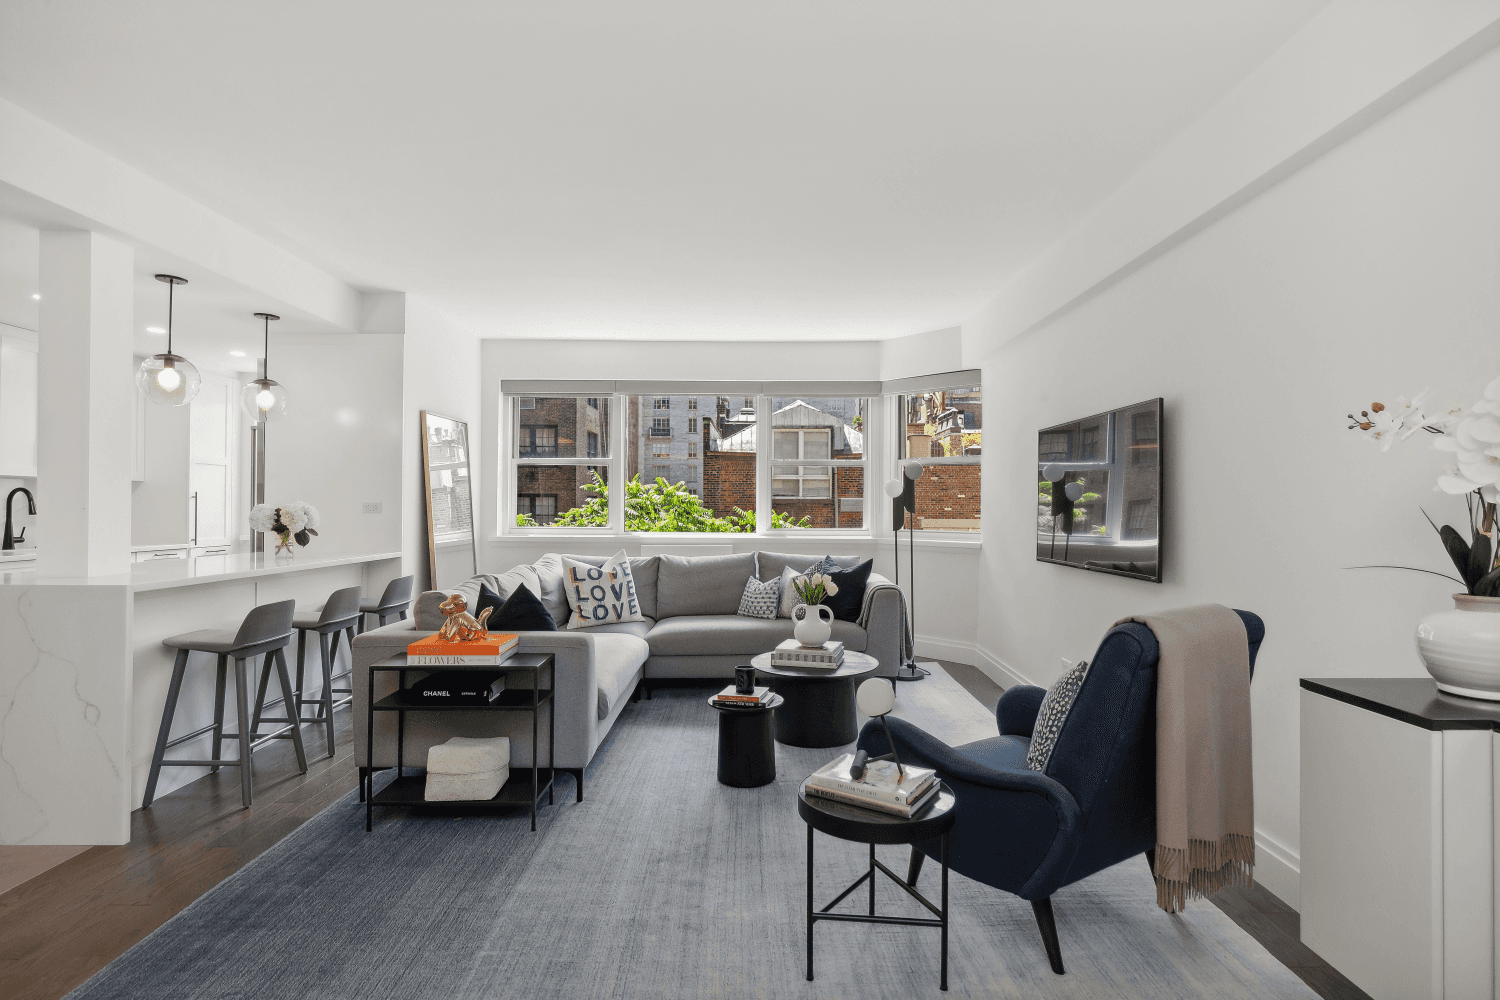 Iconic Upper East Side living awaits in this gut renovated 2 bedroom, 2 bathroom co op less than three blocks from Central Park and the Metropolitan Museum of Art.